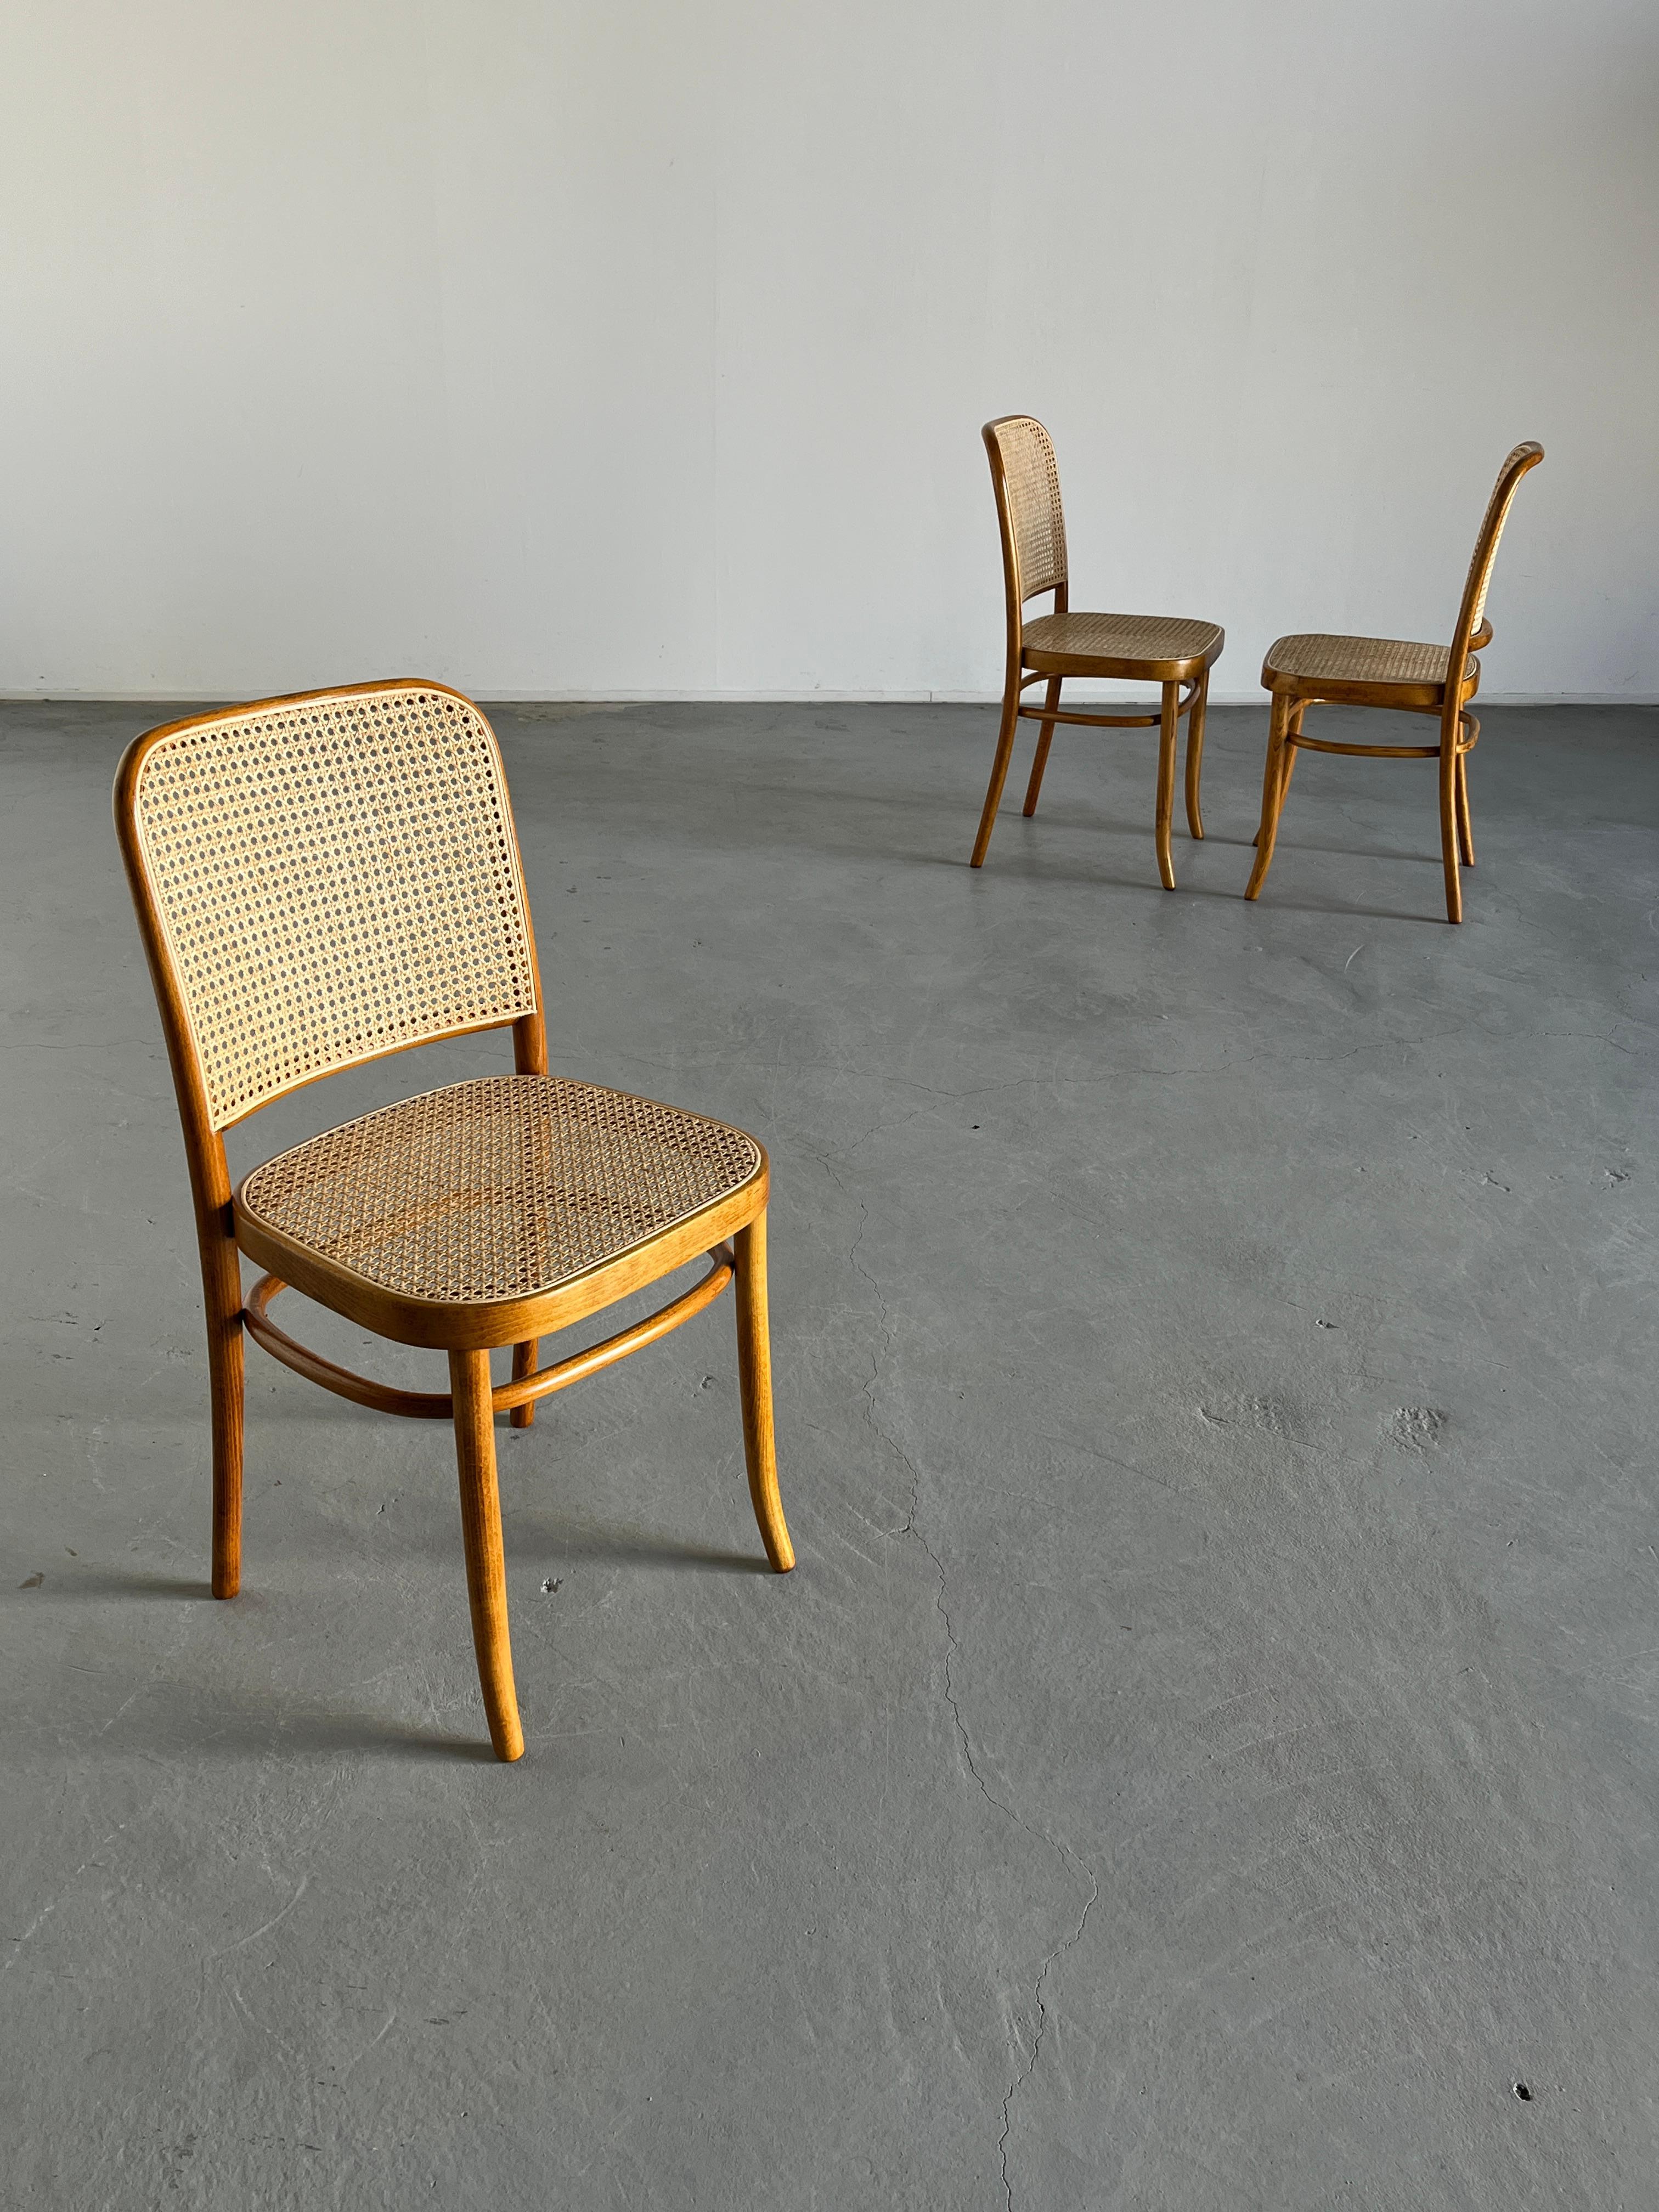 Austrian 1 of 12 Vintage Thonet Bentwood Prague Chairs by Josef Hoffman, 1970s, Restored For Sale